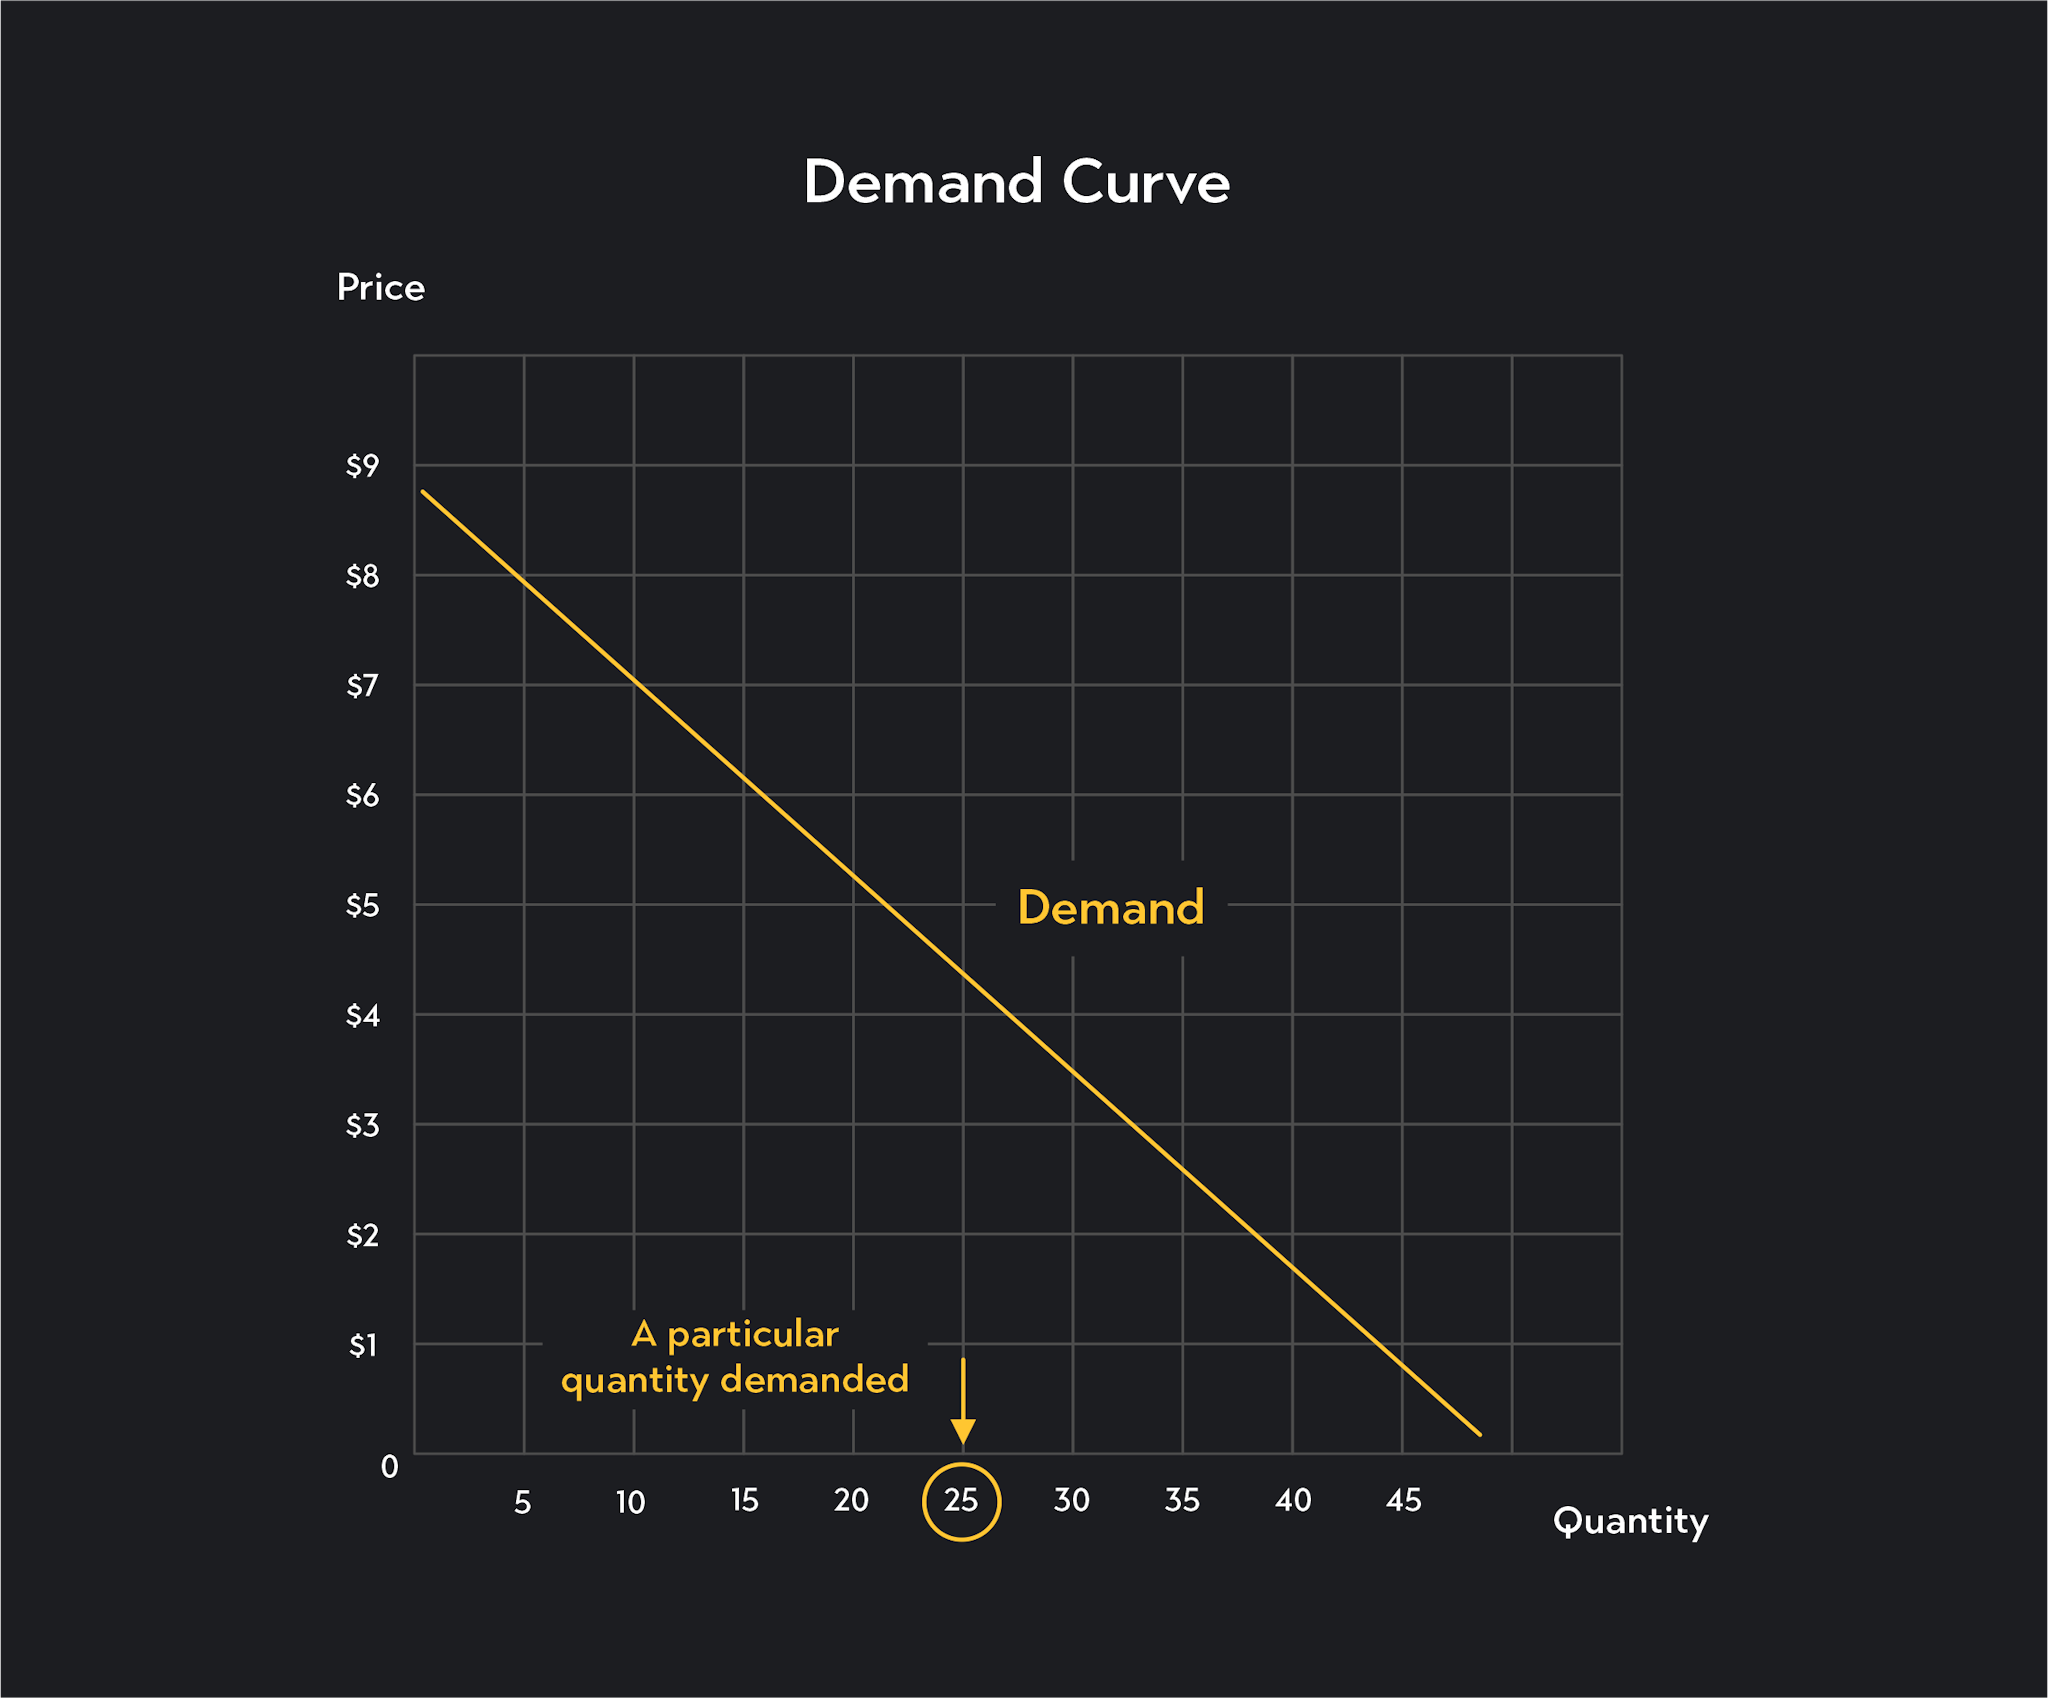 Graph showing the entire demand curve, while quantity demanded refers to a quantity associated with a given point along the demand curve.